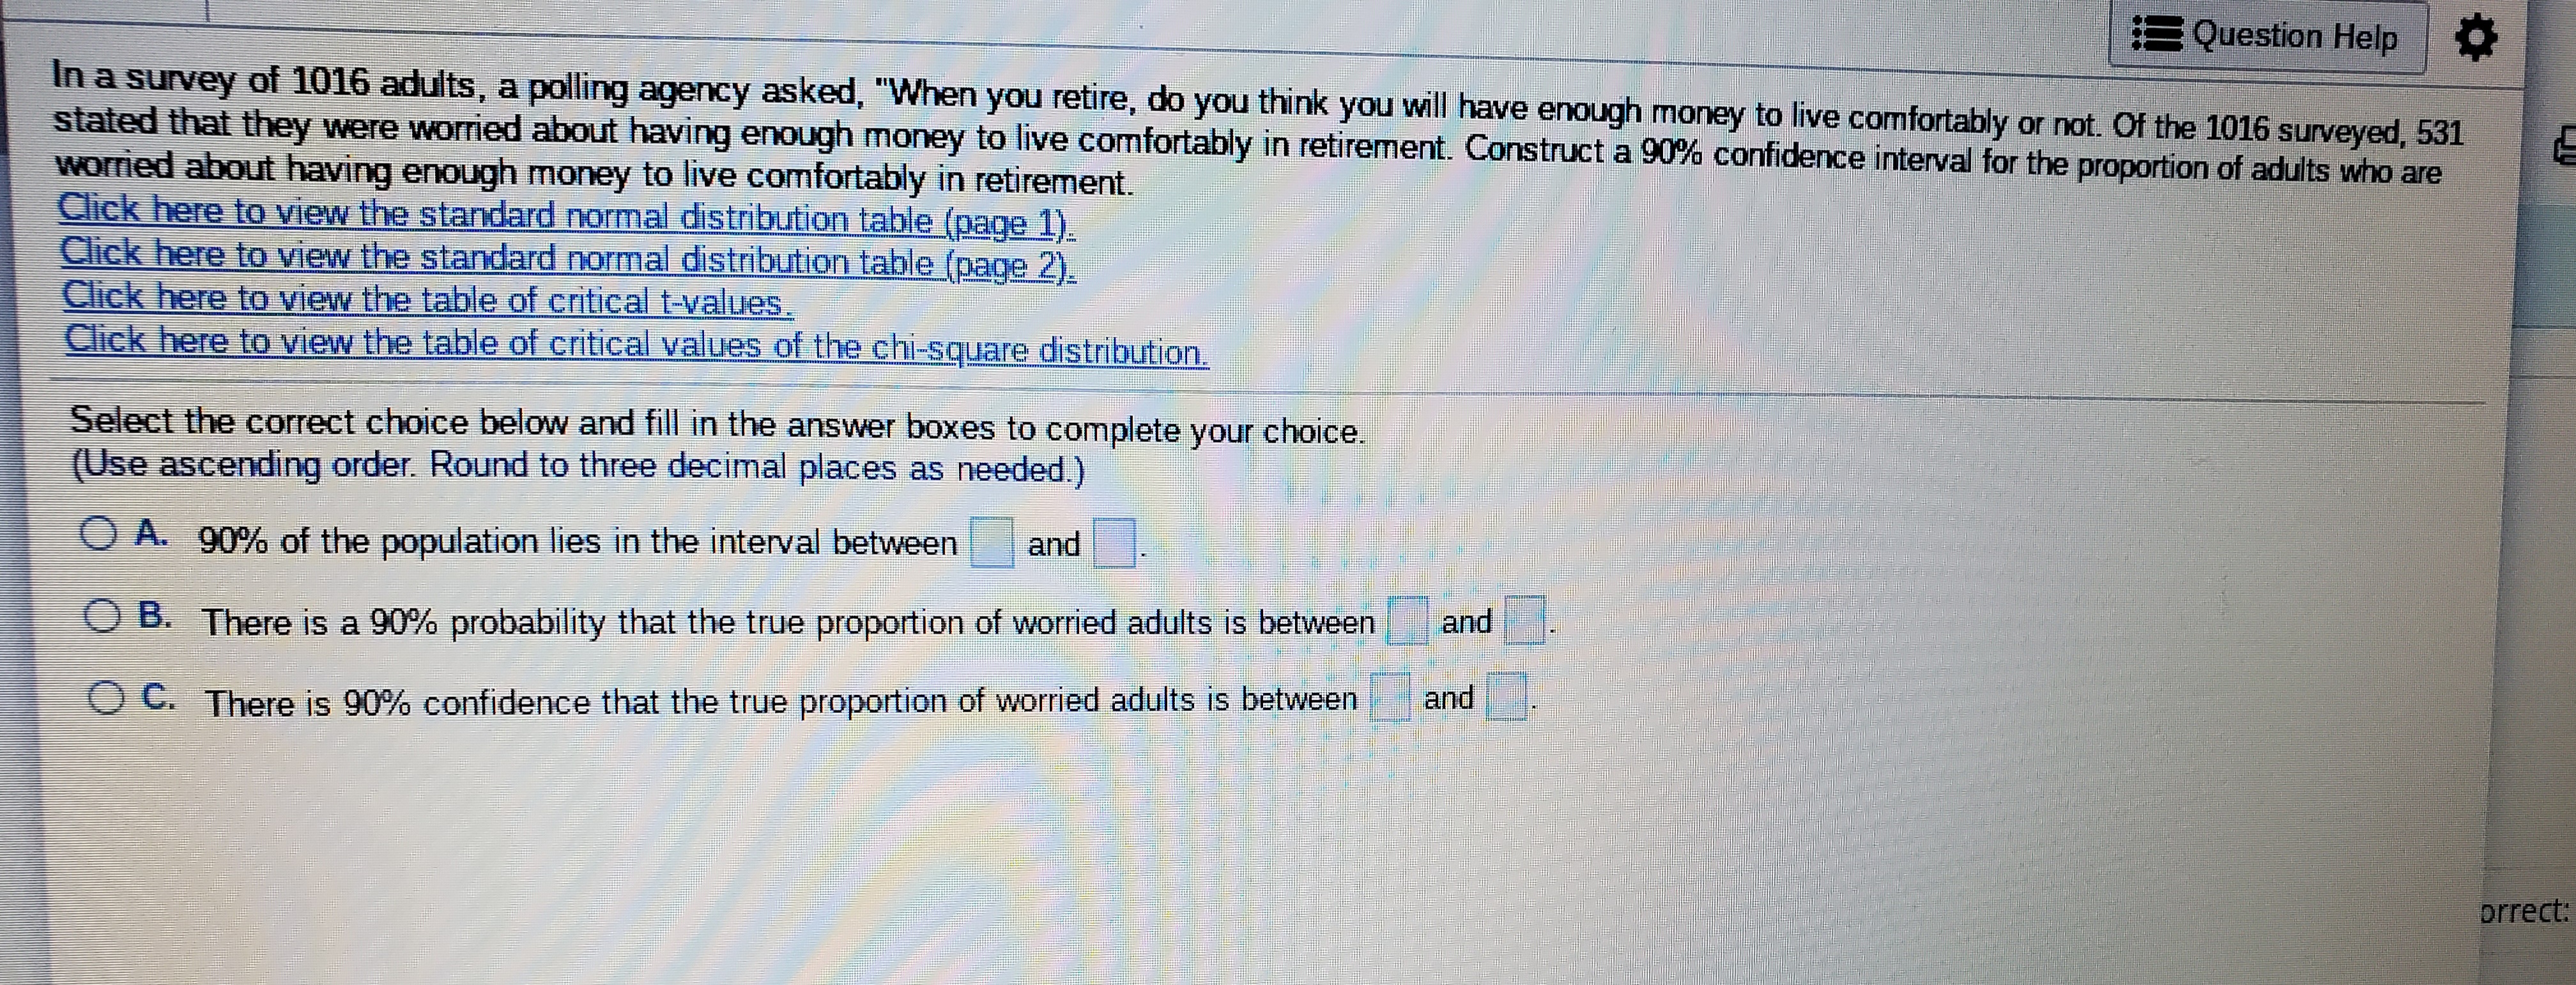 In a survey of 1016 adults, a polling agency asked, "When you retire, do you think you will have enough money to live comfortably or not. Of the 1016 surveyed, 531
stated that they were worried about having enough money to live comfortably in retirement. Construct a 90% confidence interval for the proportion of adults who are
worried about having enough money to live comfortably in retirement.
Click bo o to
